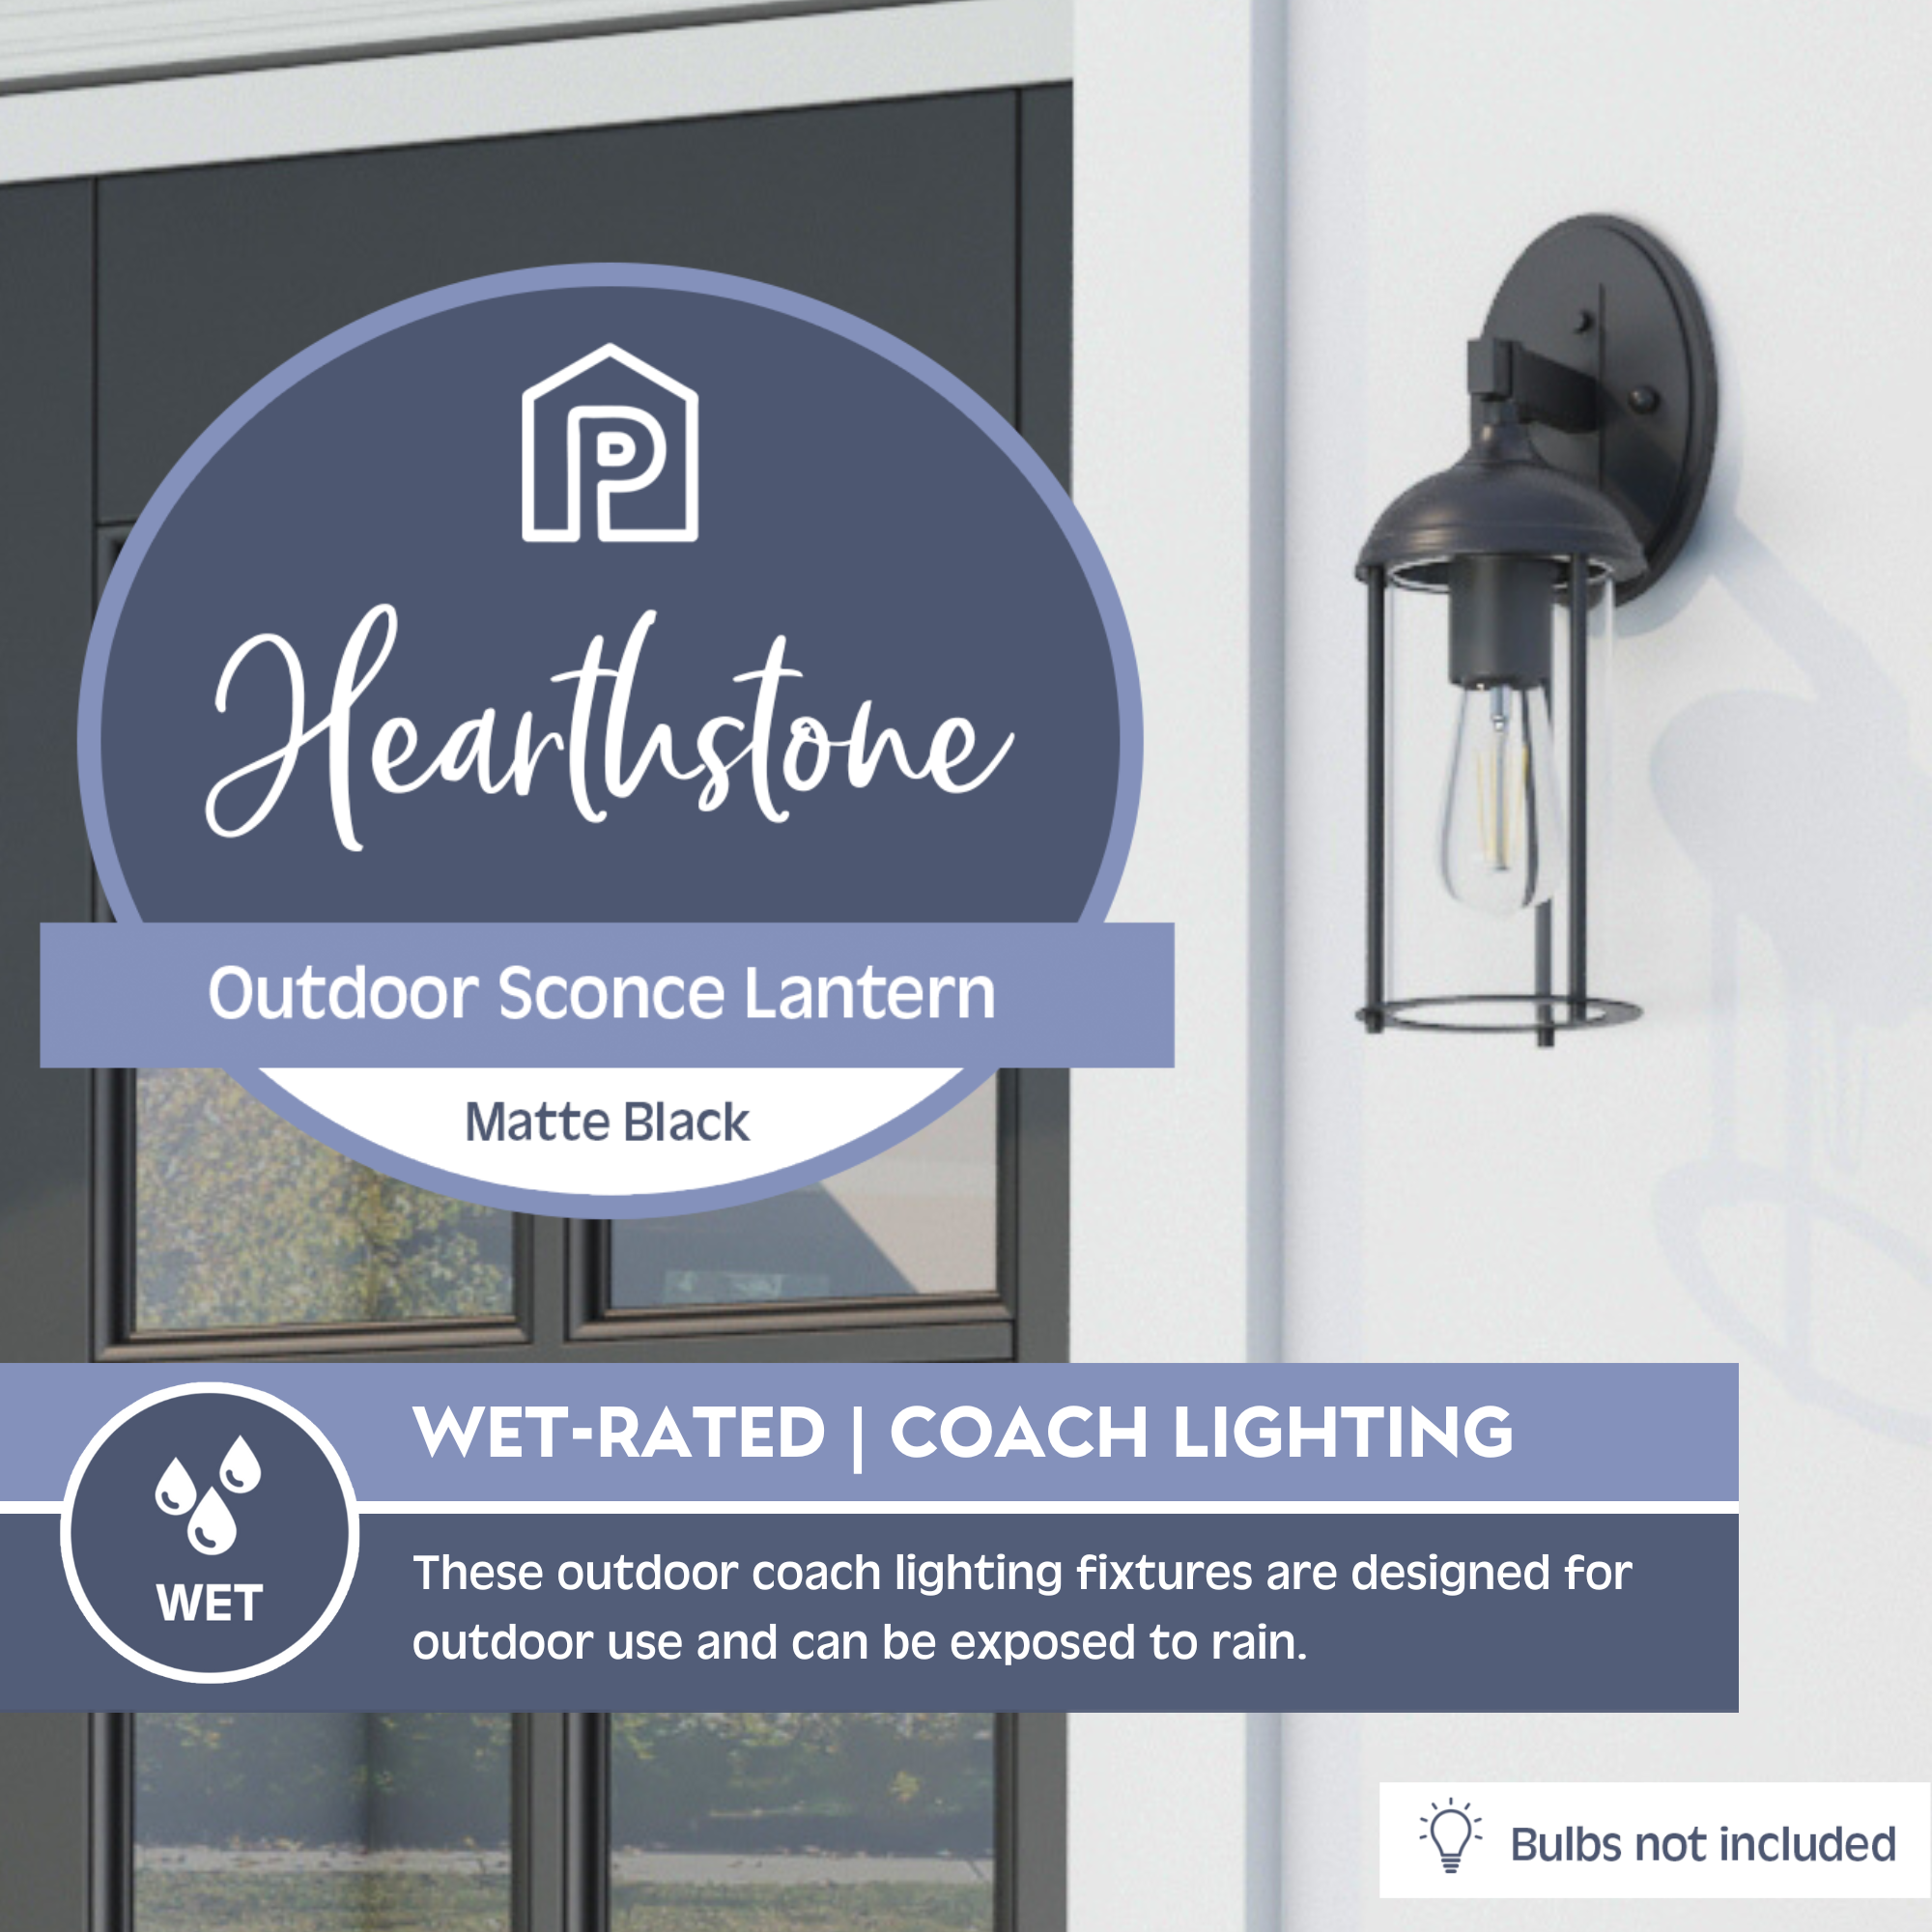 Hearthstone, Wet-Rated Coach Light, Matte Black by Prominence Home